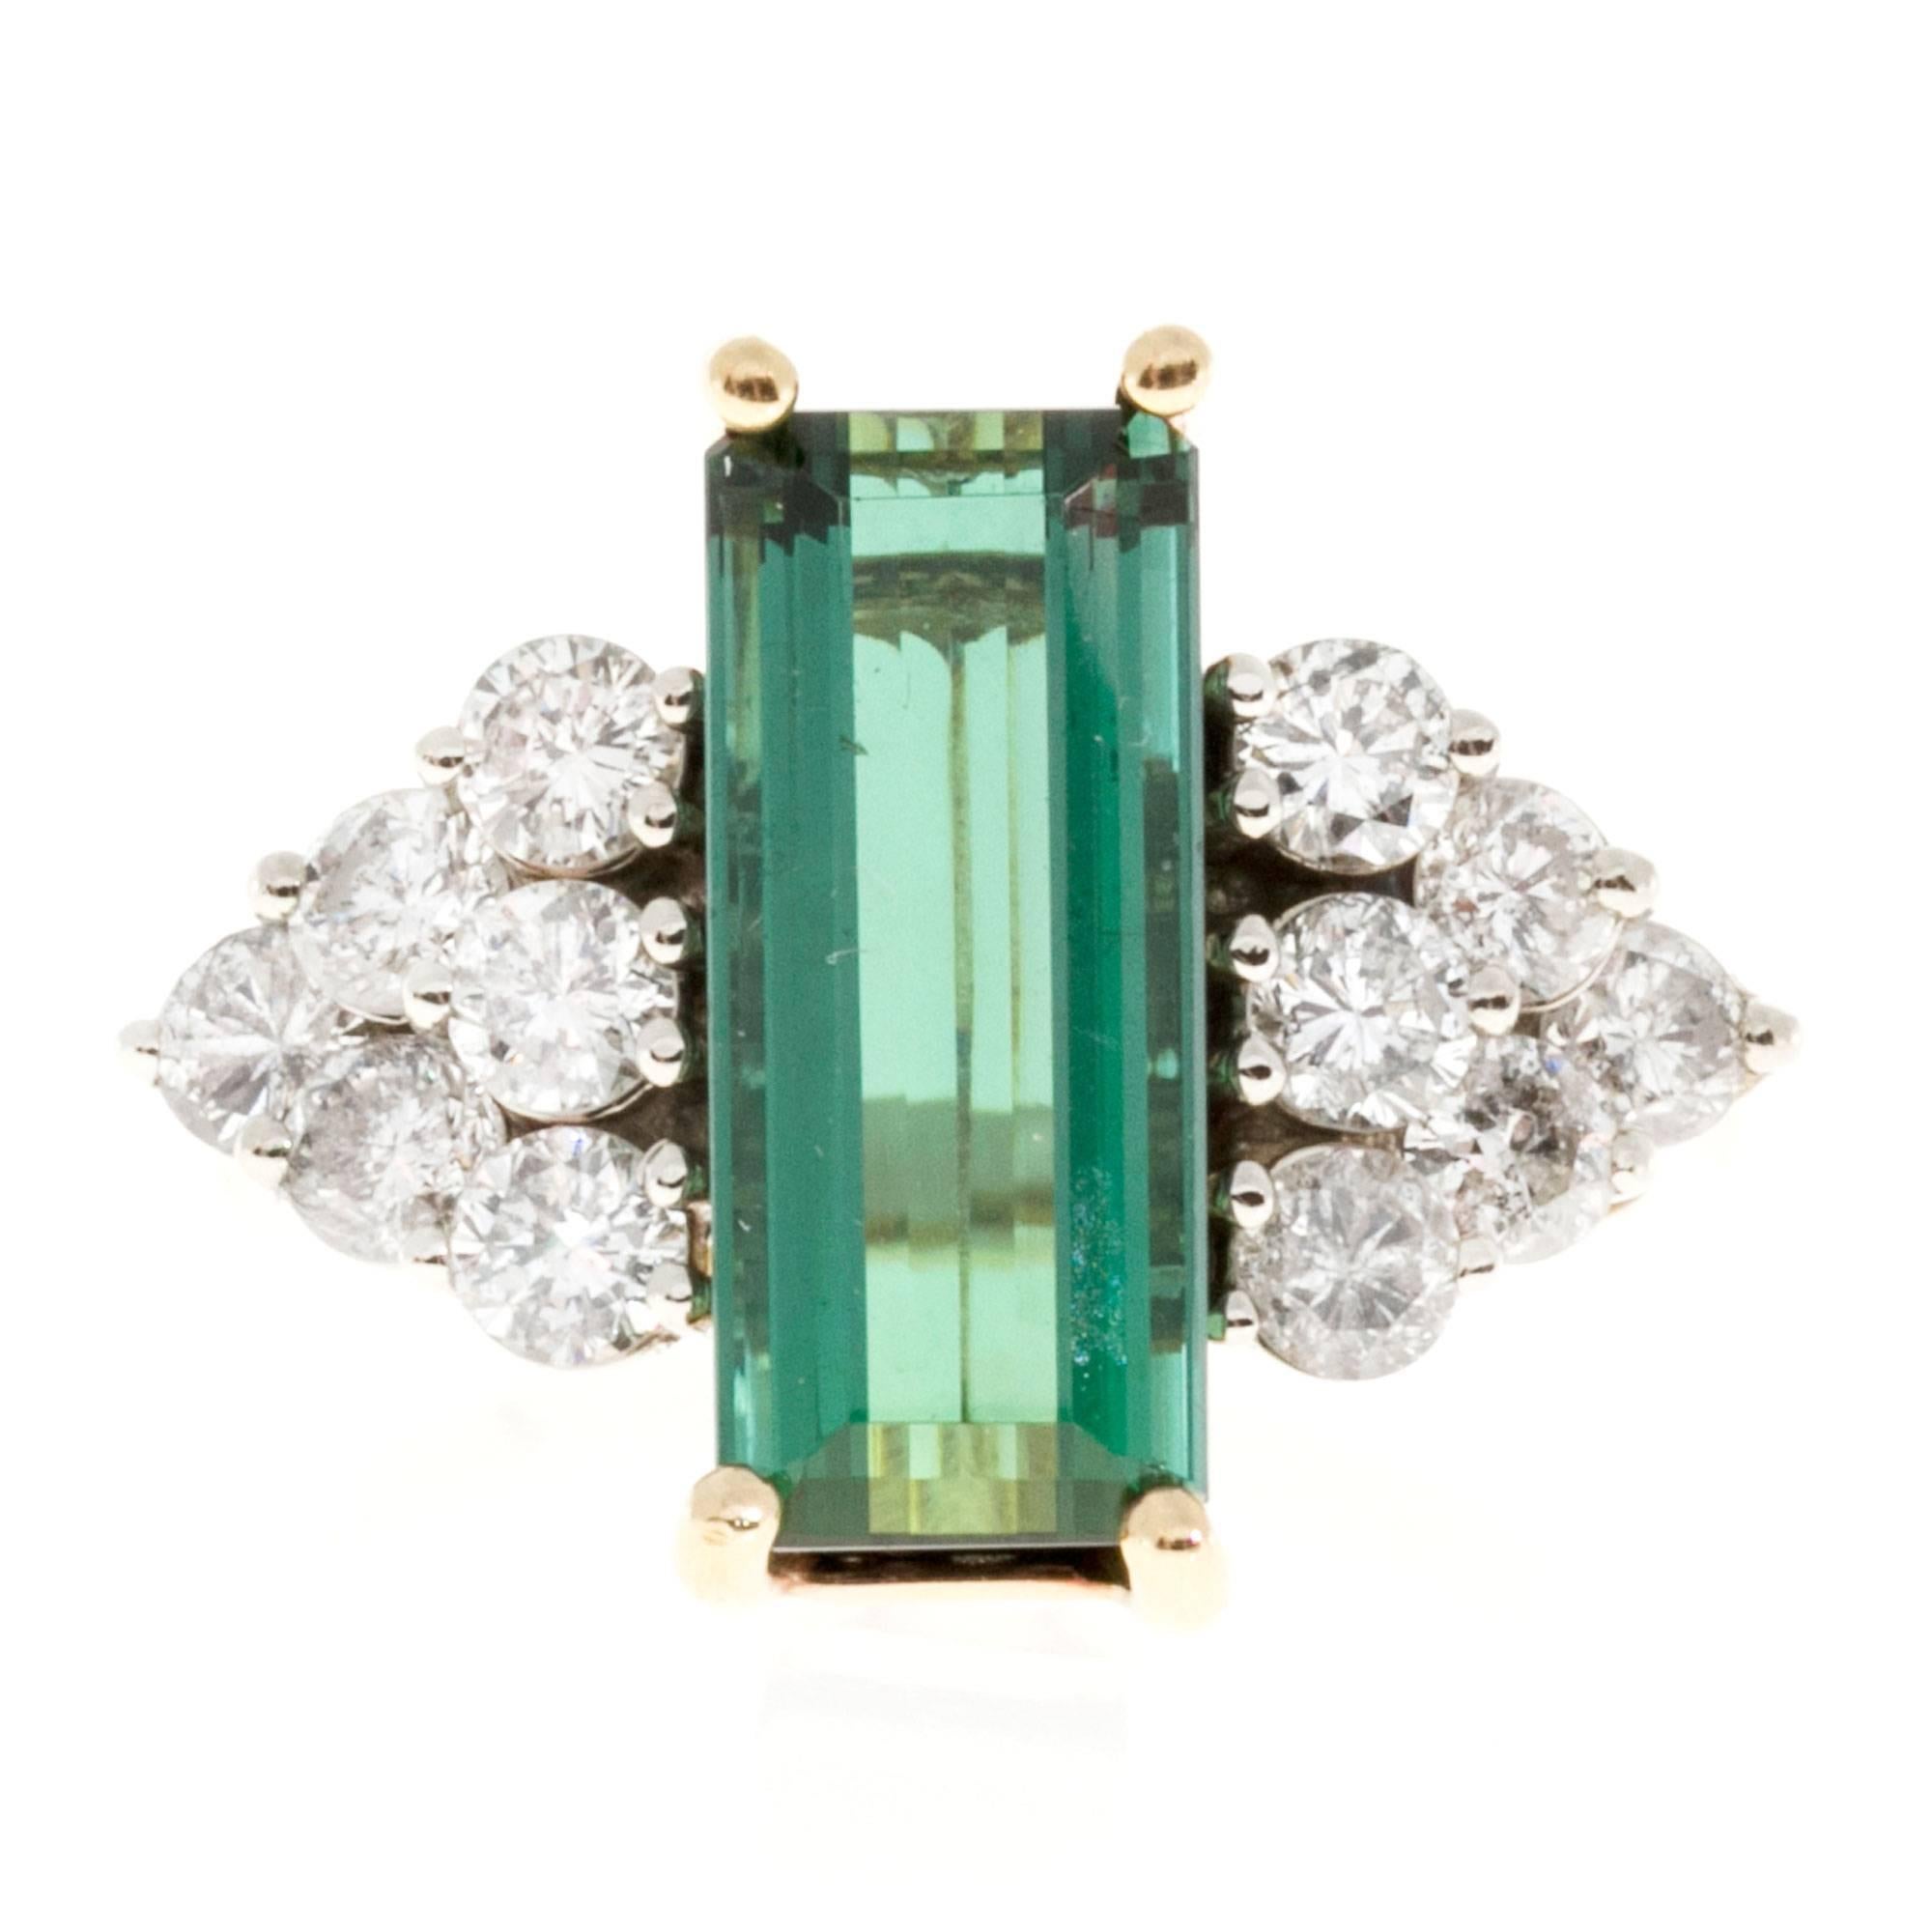 Elongated emerald cut deep green Tourmaline in a handmade 14k yellow and white gold setting. From the Peter Suchy workshop. 

1 emerald cut green Tourmaline approx. total weight 4.30cts
12 round diamonds approx. total weight 1.20cts, H, SI1
14k